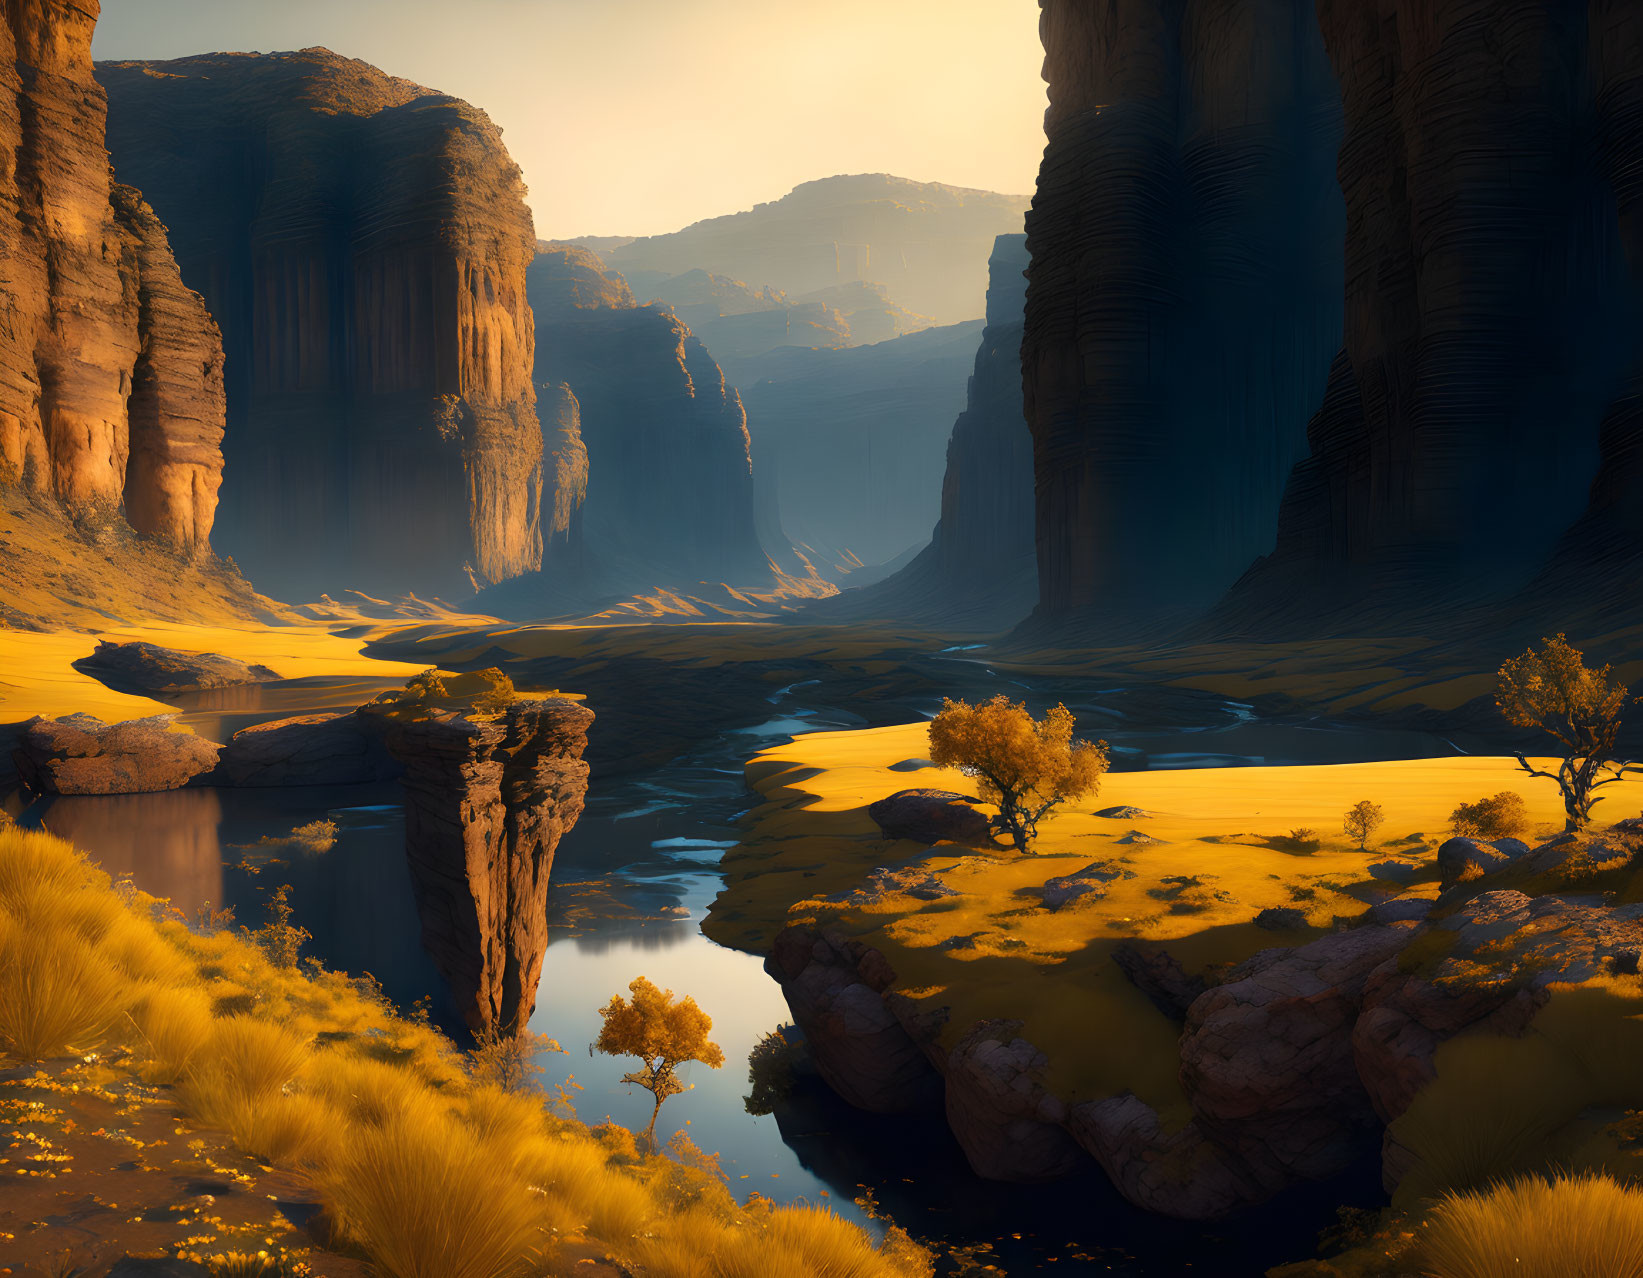 Serene canyon with towering cliffs and reflective water